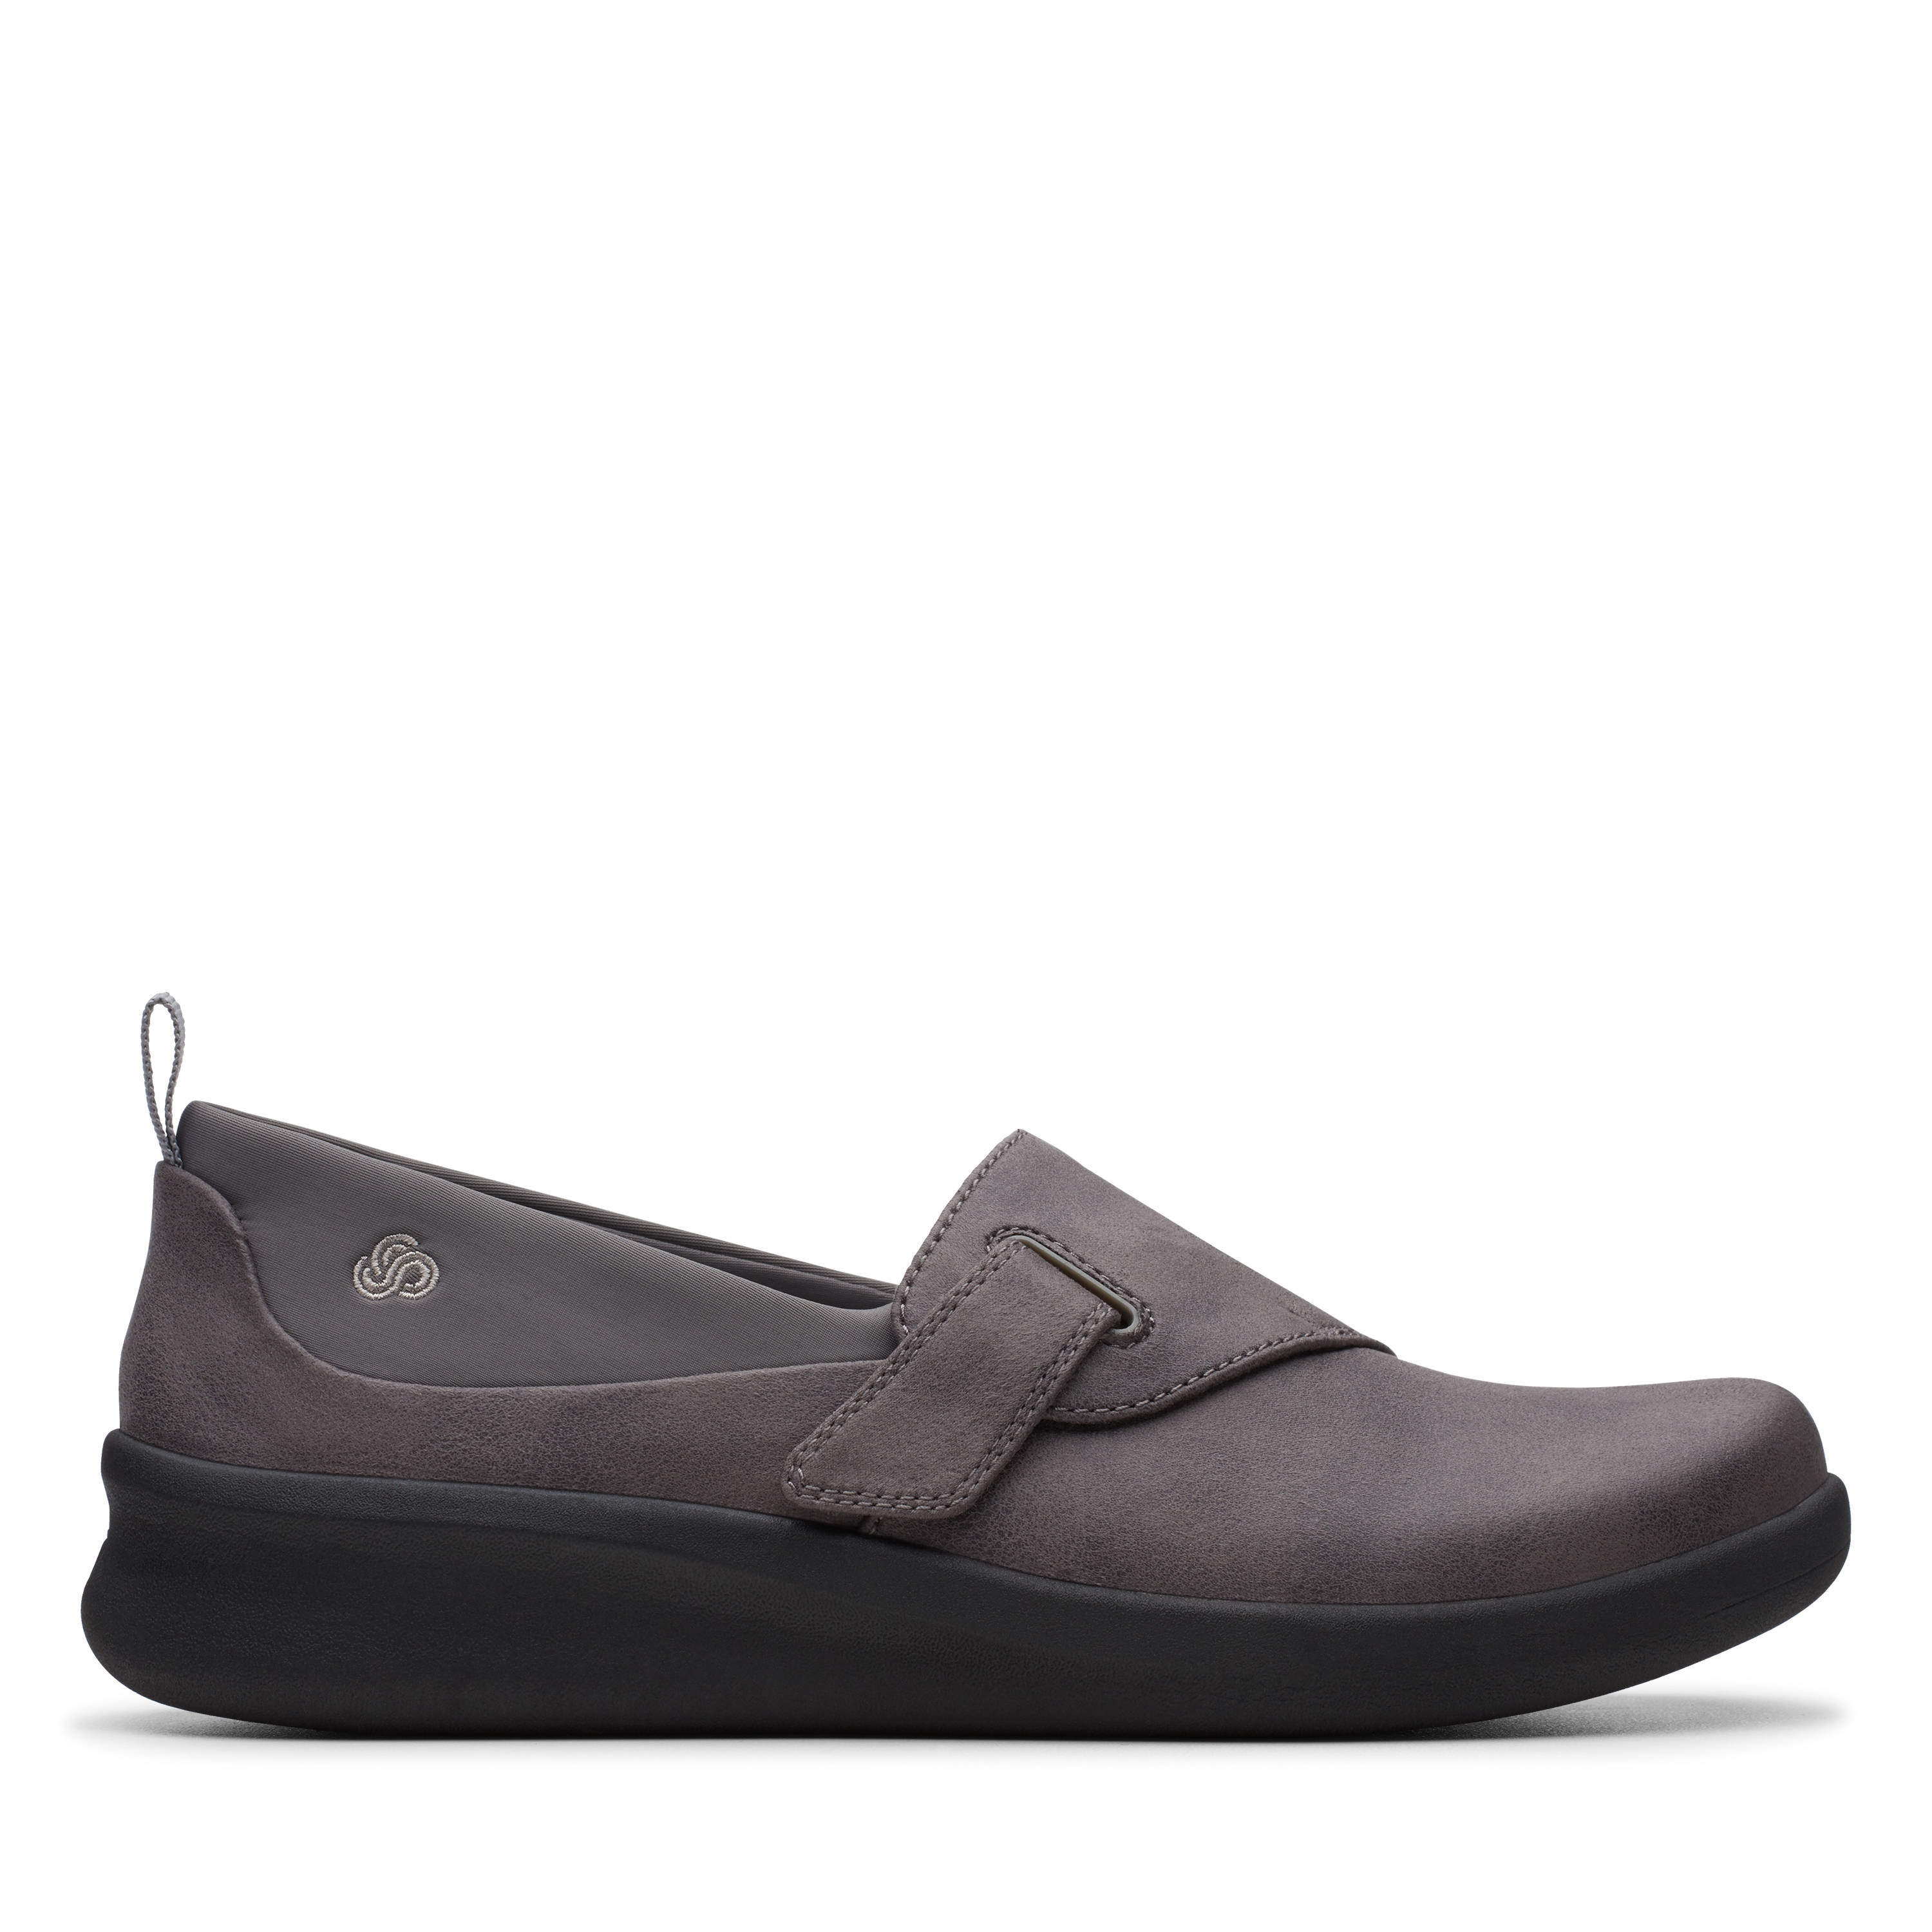 Clarks | Sillian2.0Ease Grey Synthetic Slip On shoes